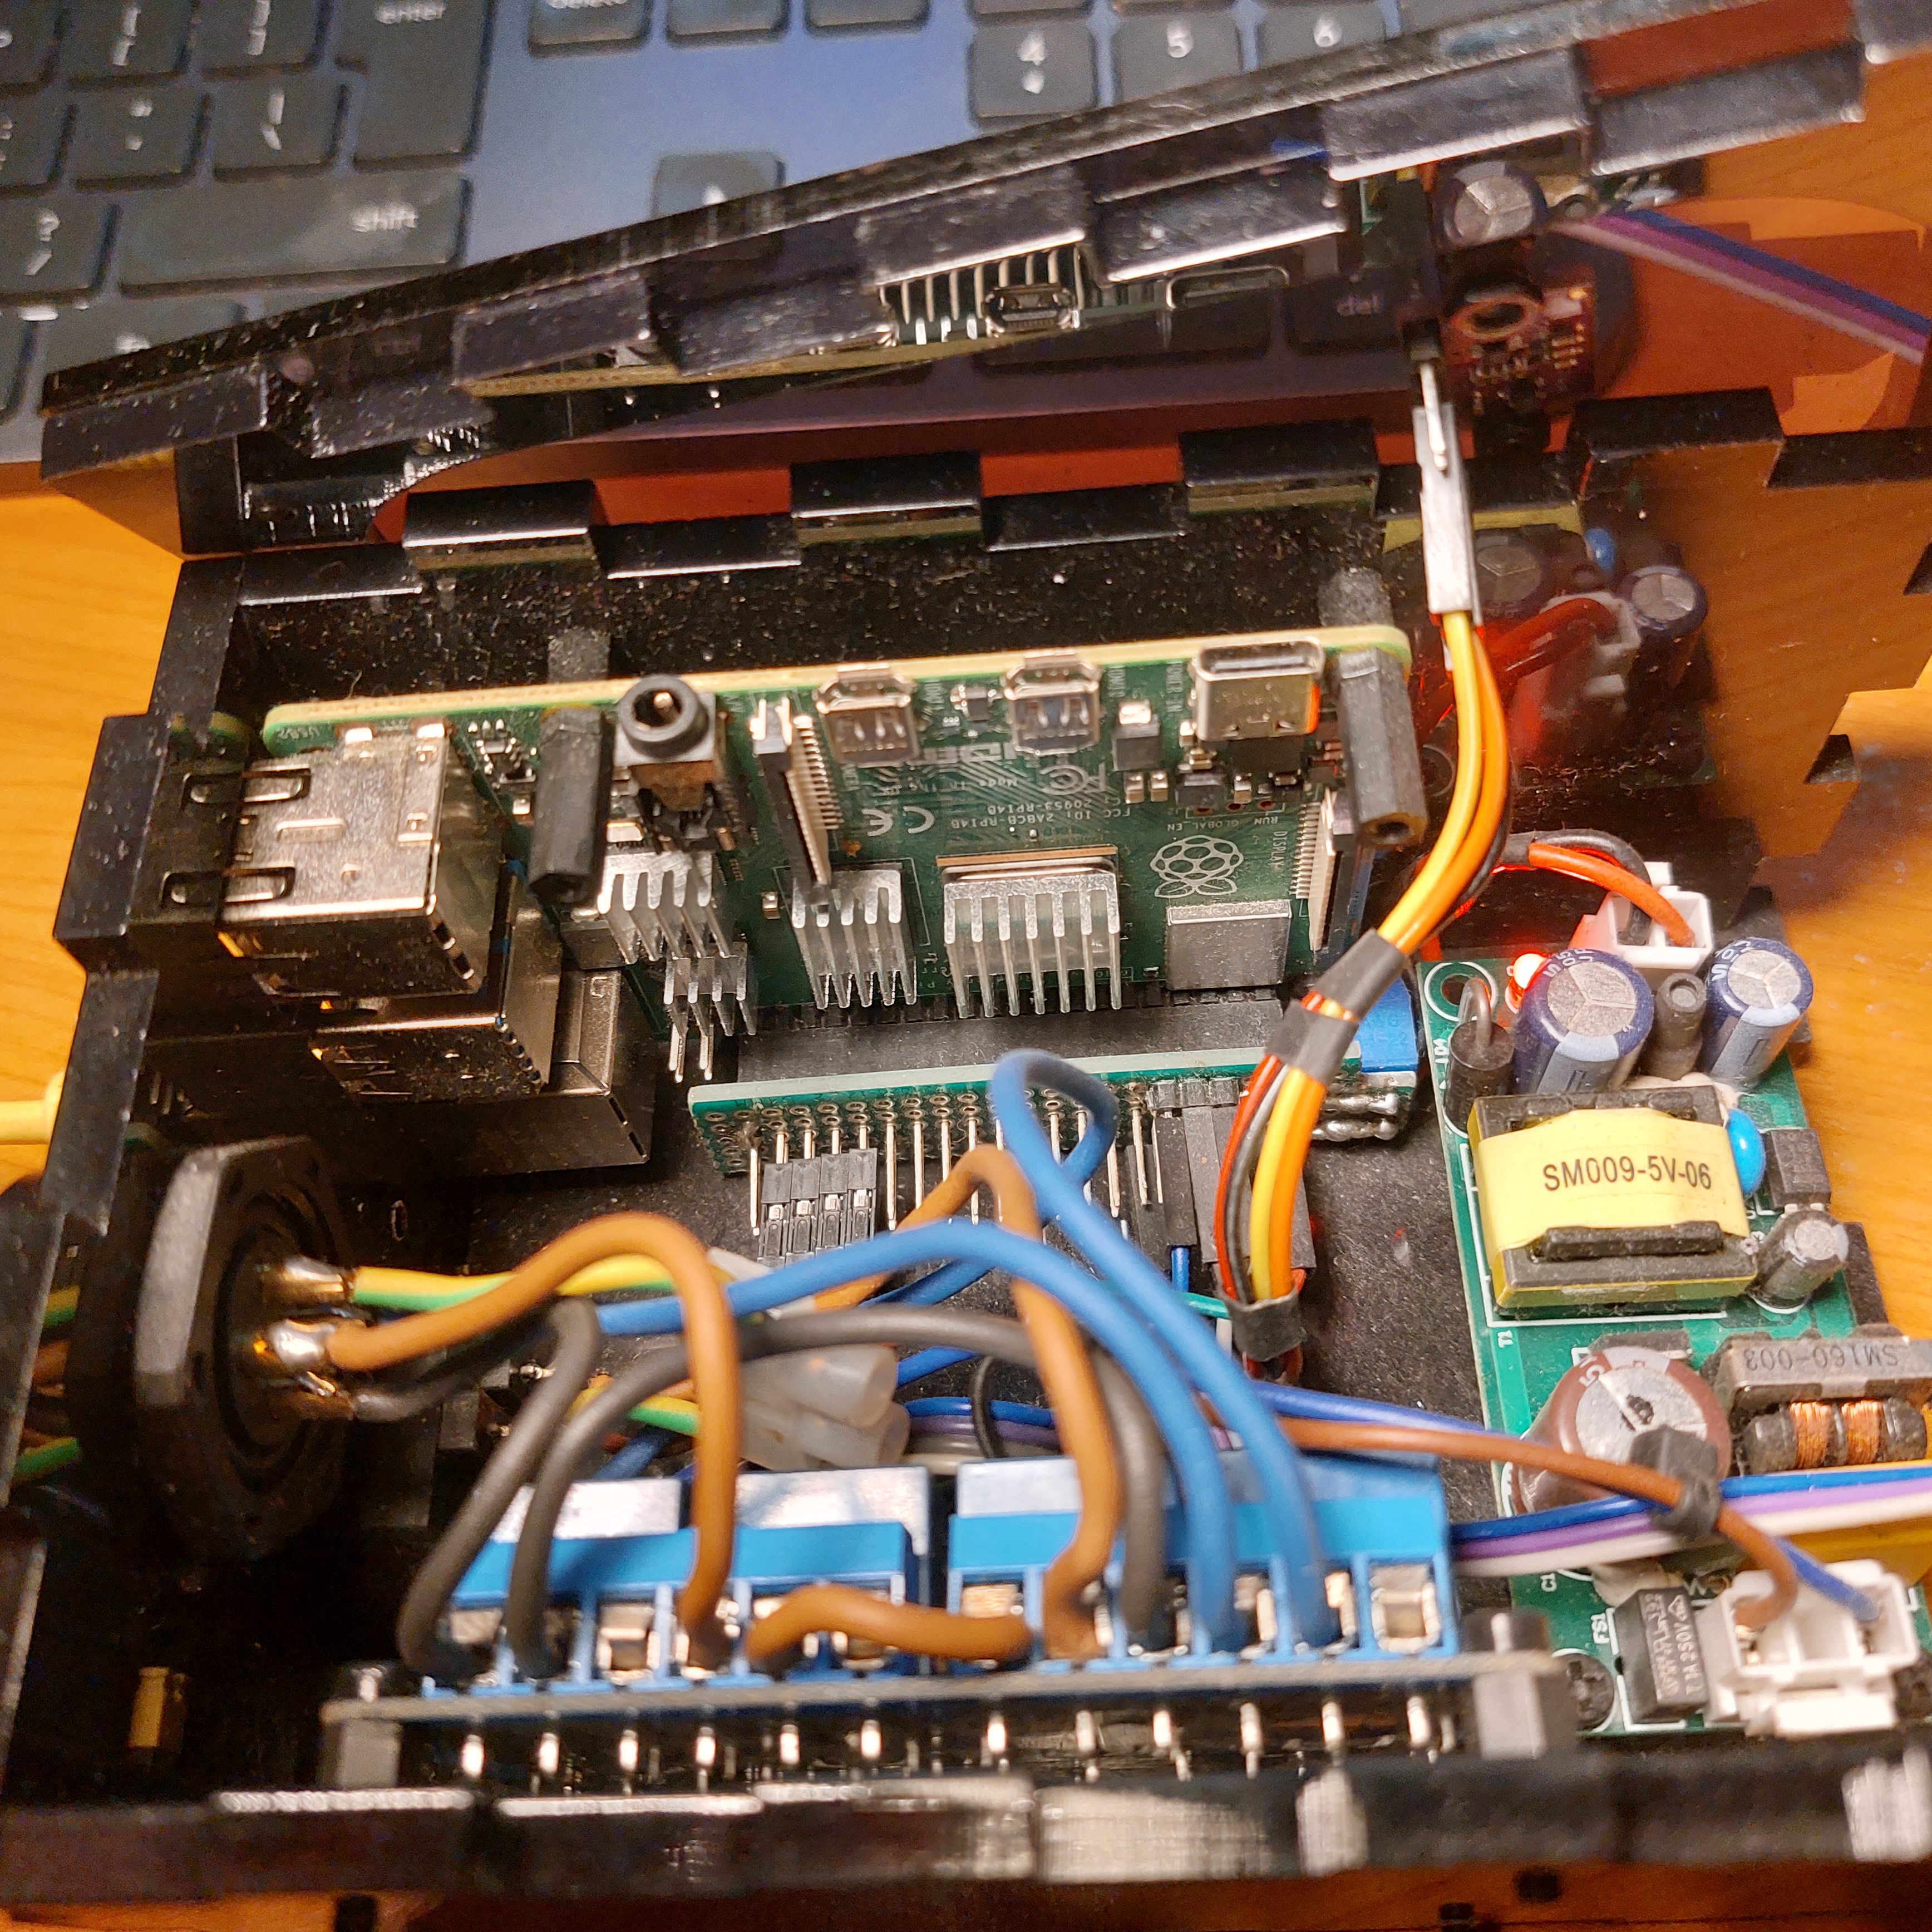 Inside of control unit (v2 with smaller power supply)